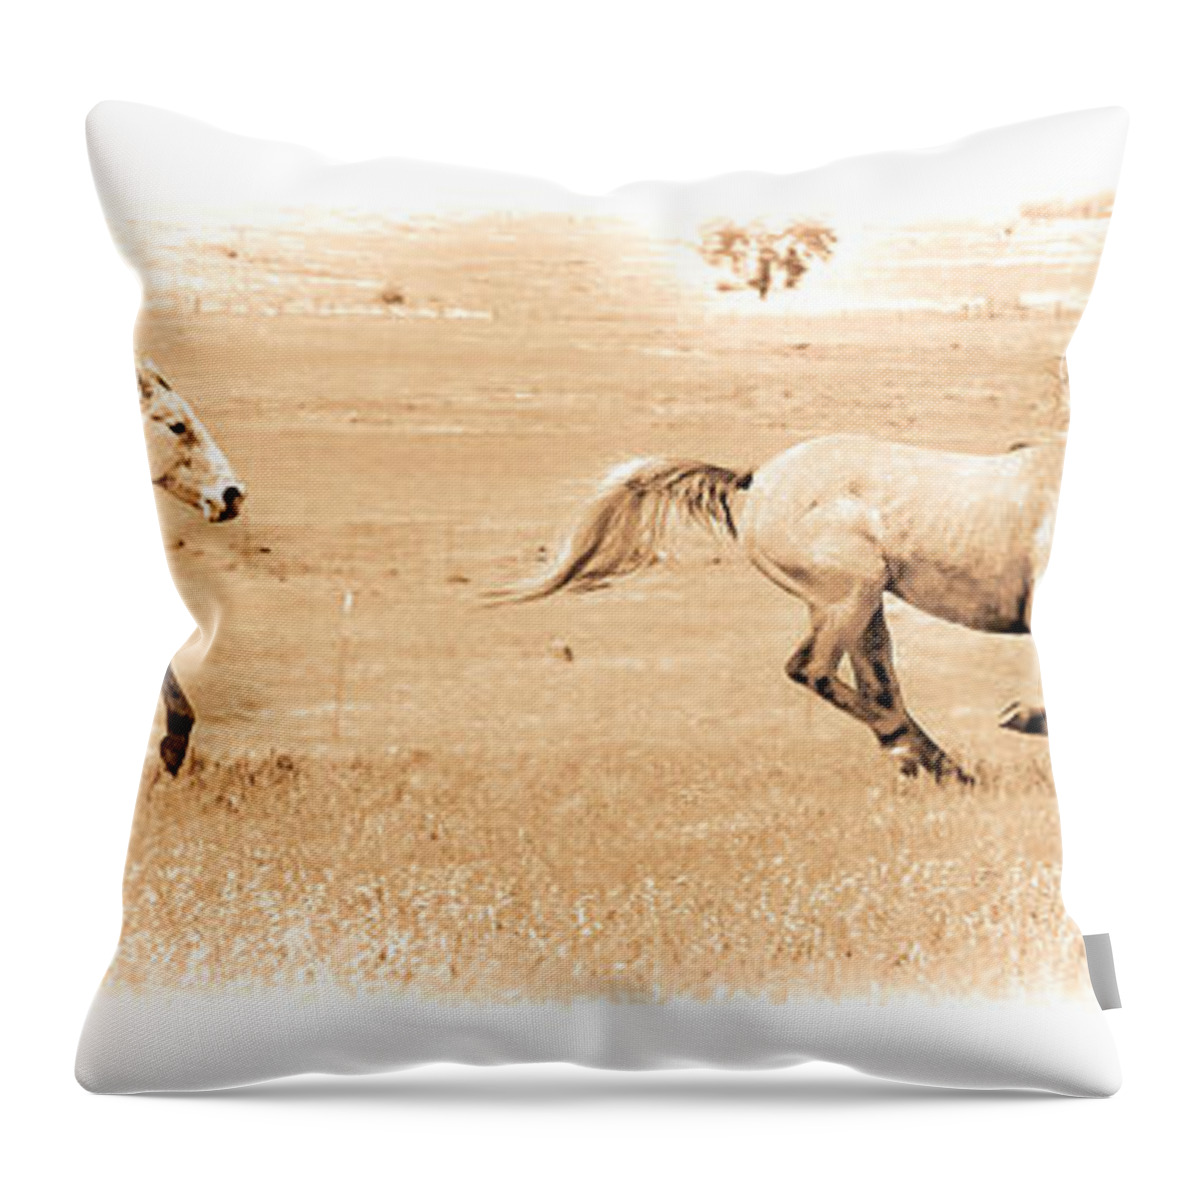  Horses Throw Pillow featuring the photograph Running Out West by Steve McKinzie